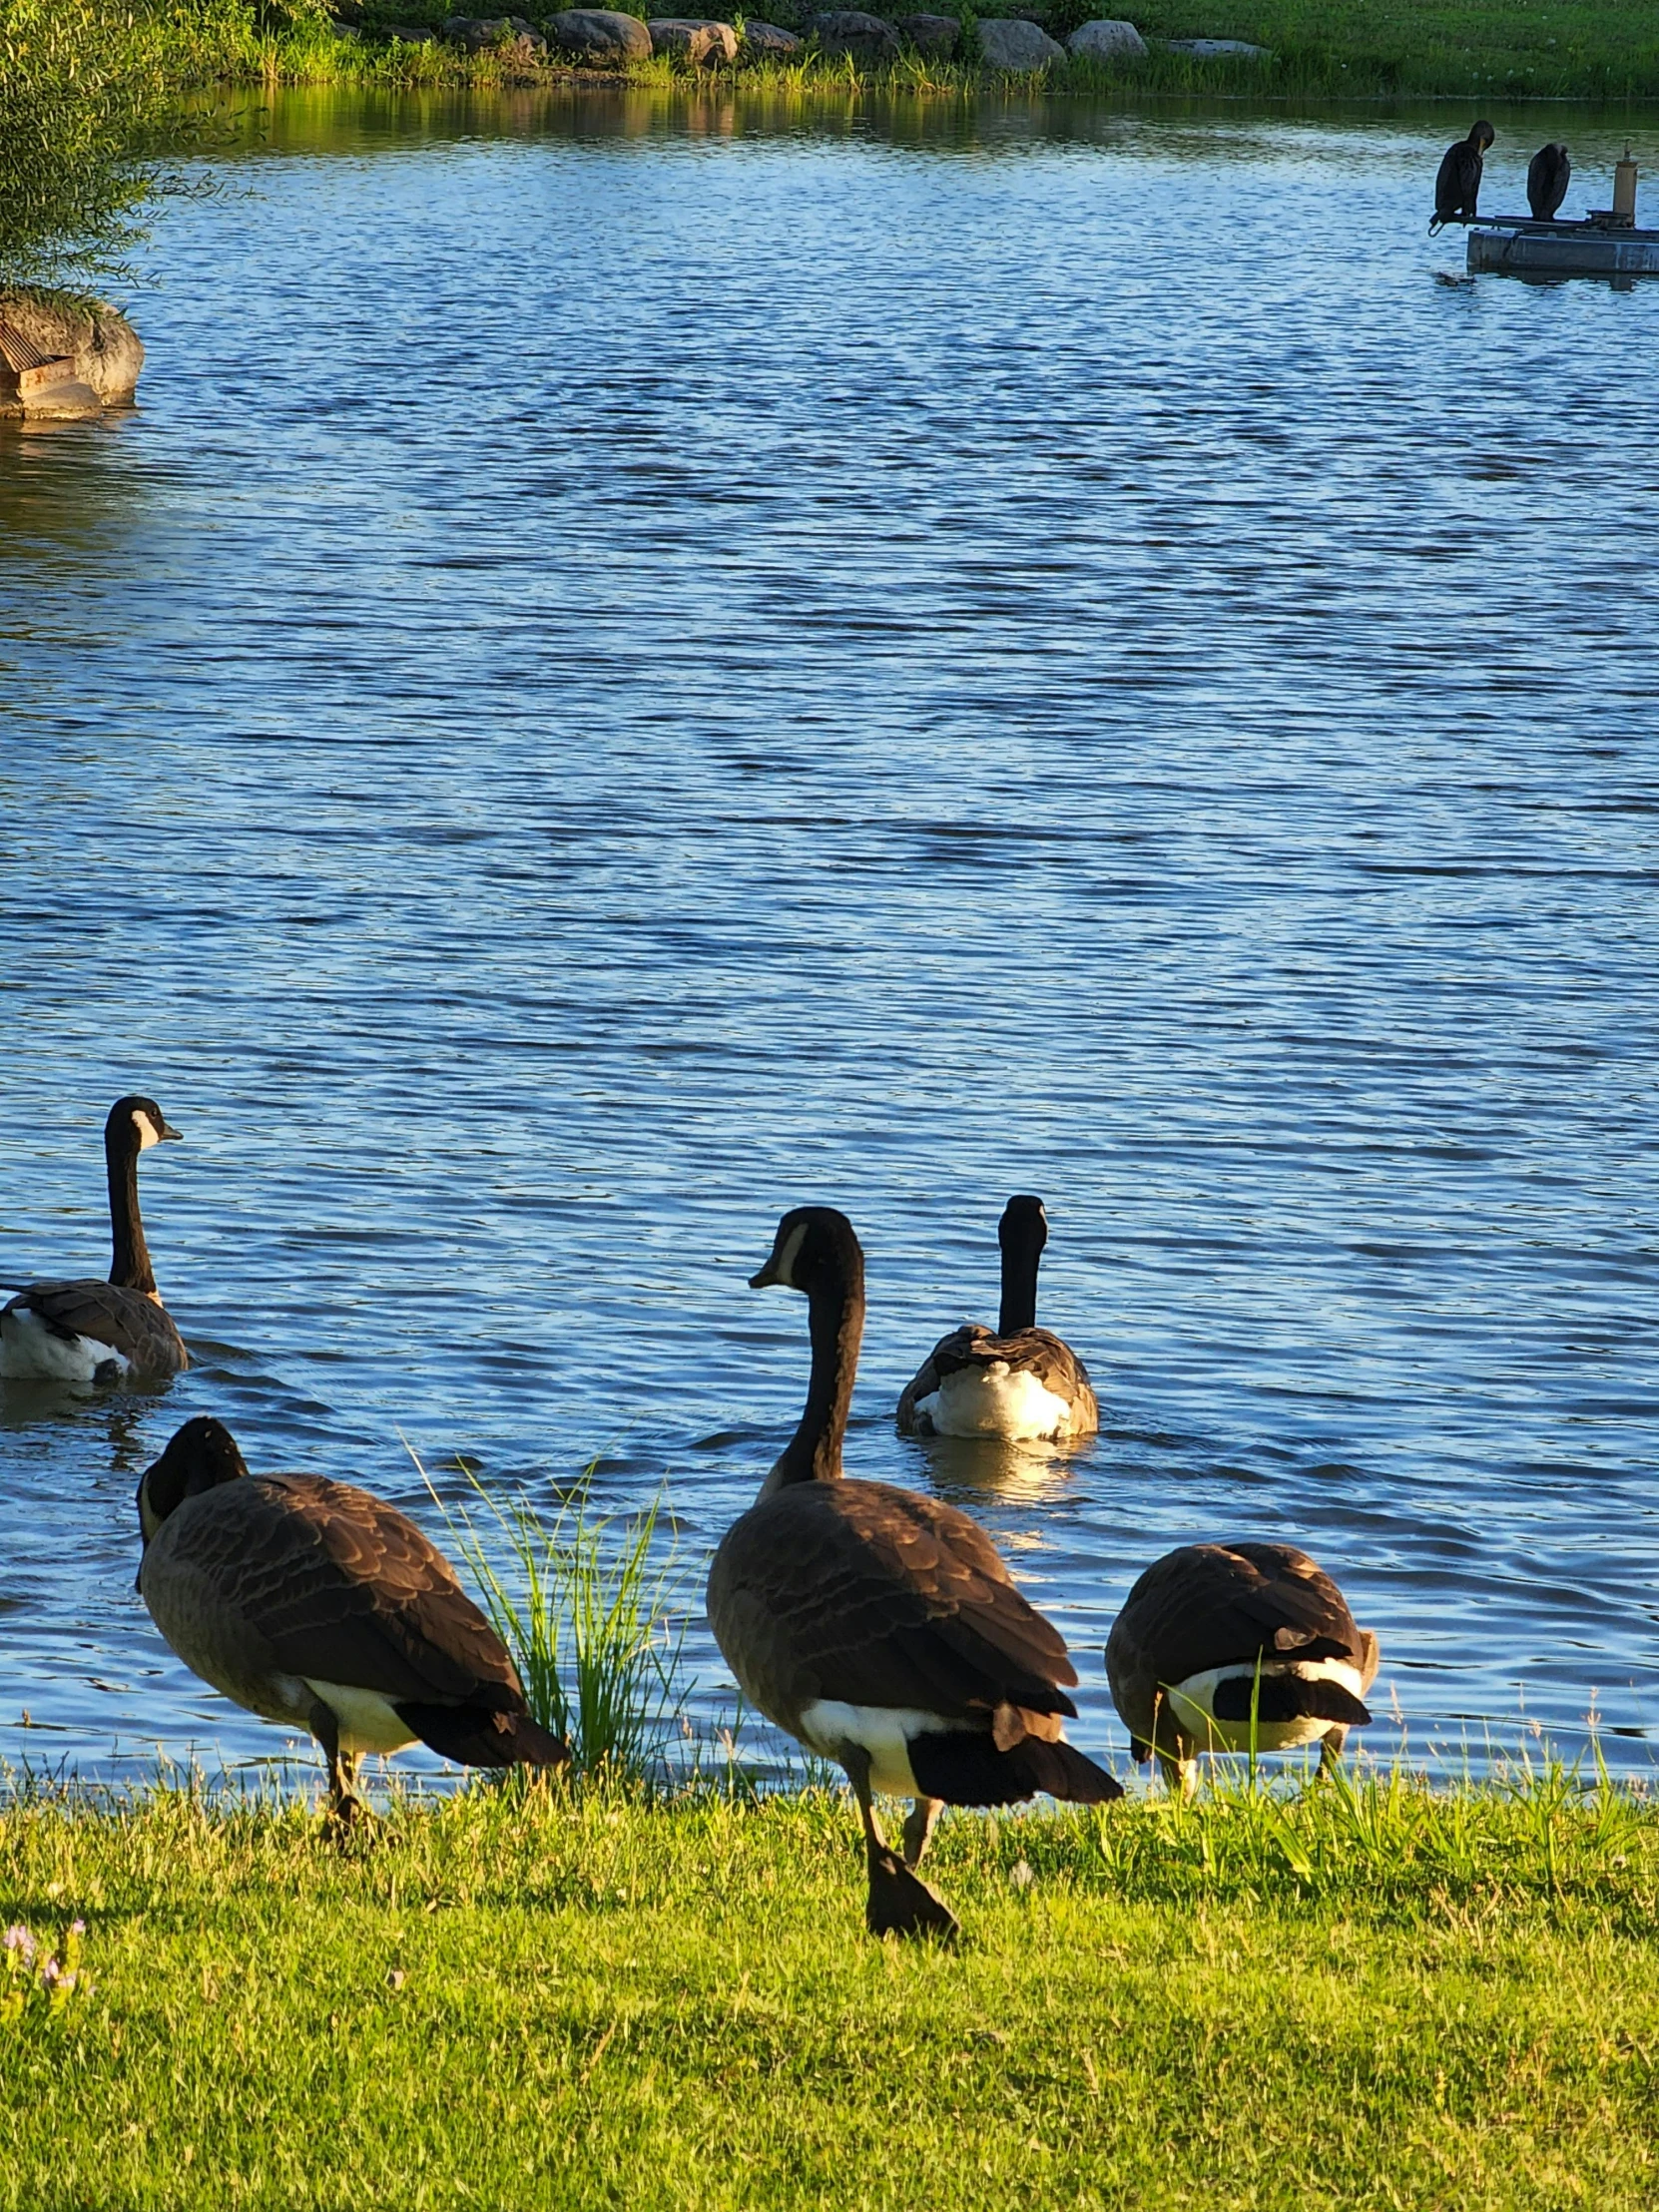 the geese are standing on the bank of the pond